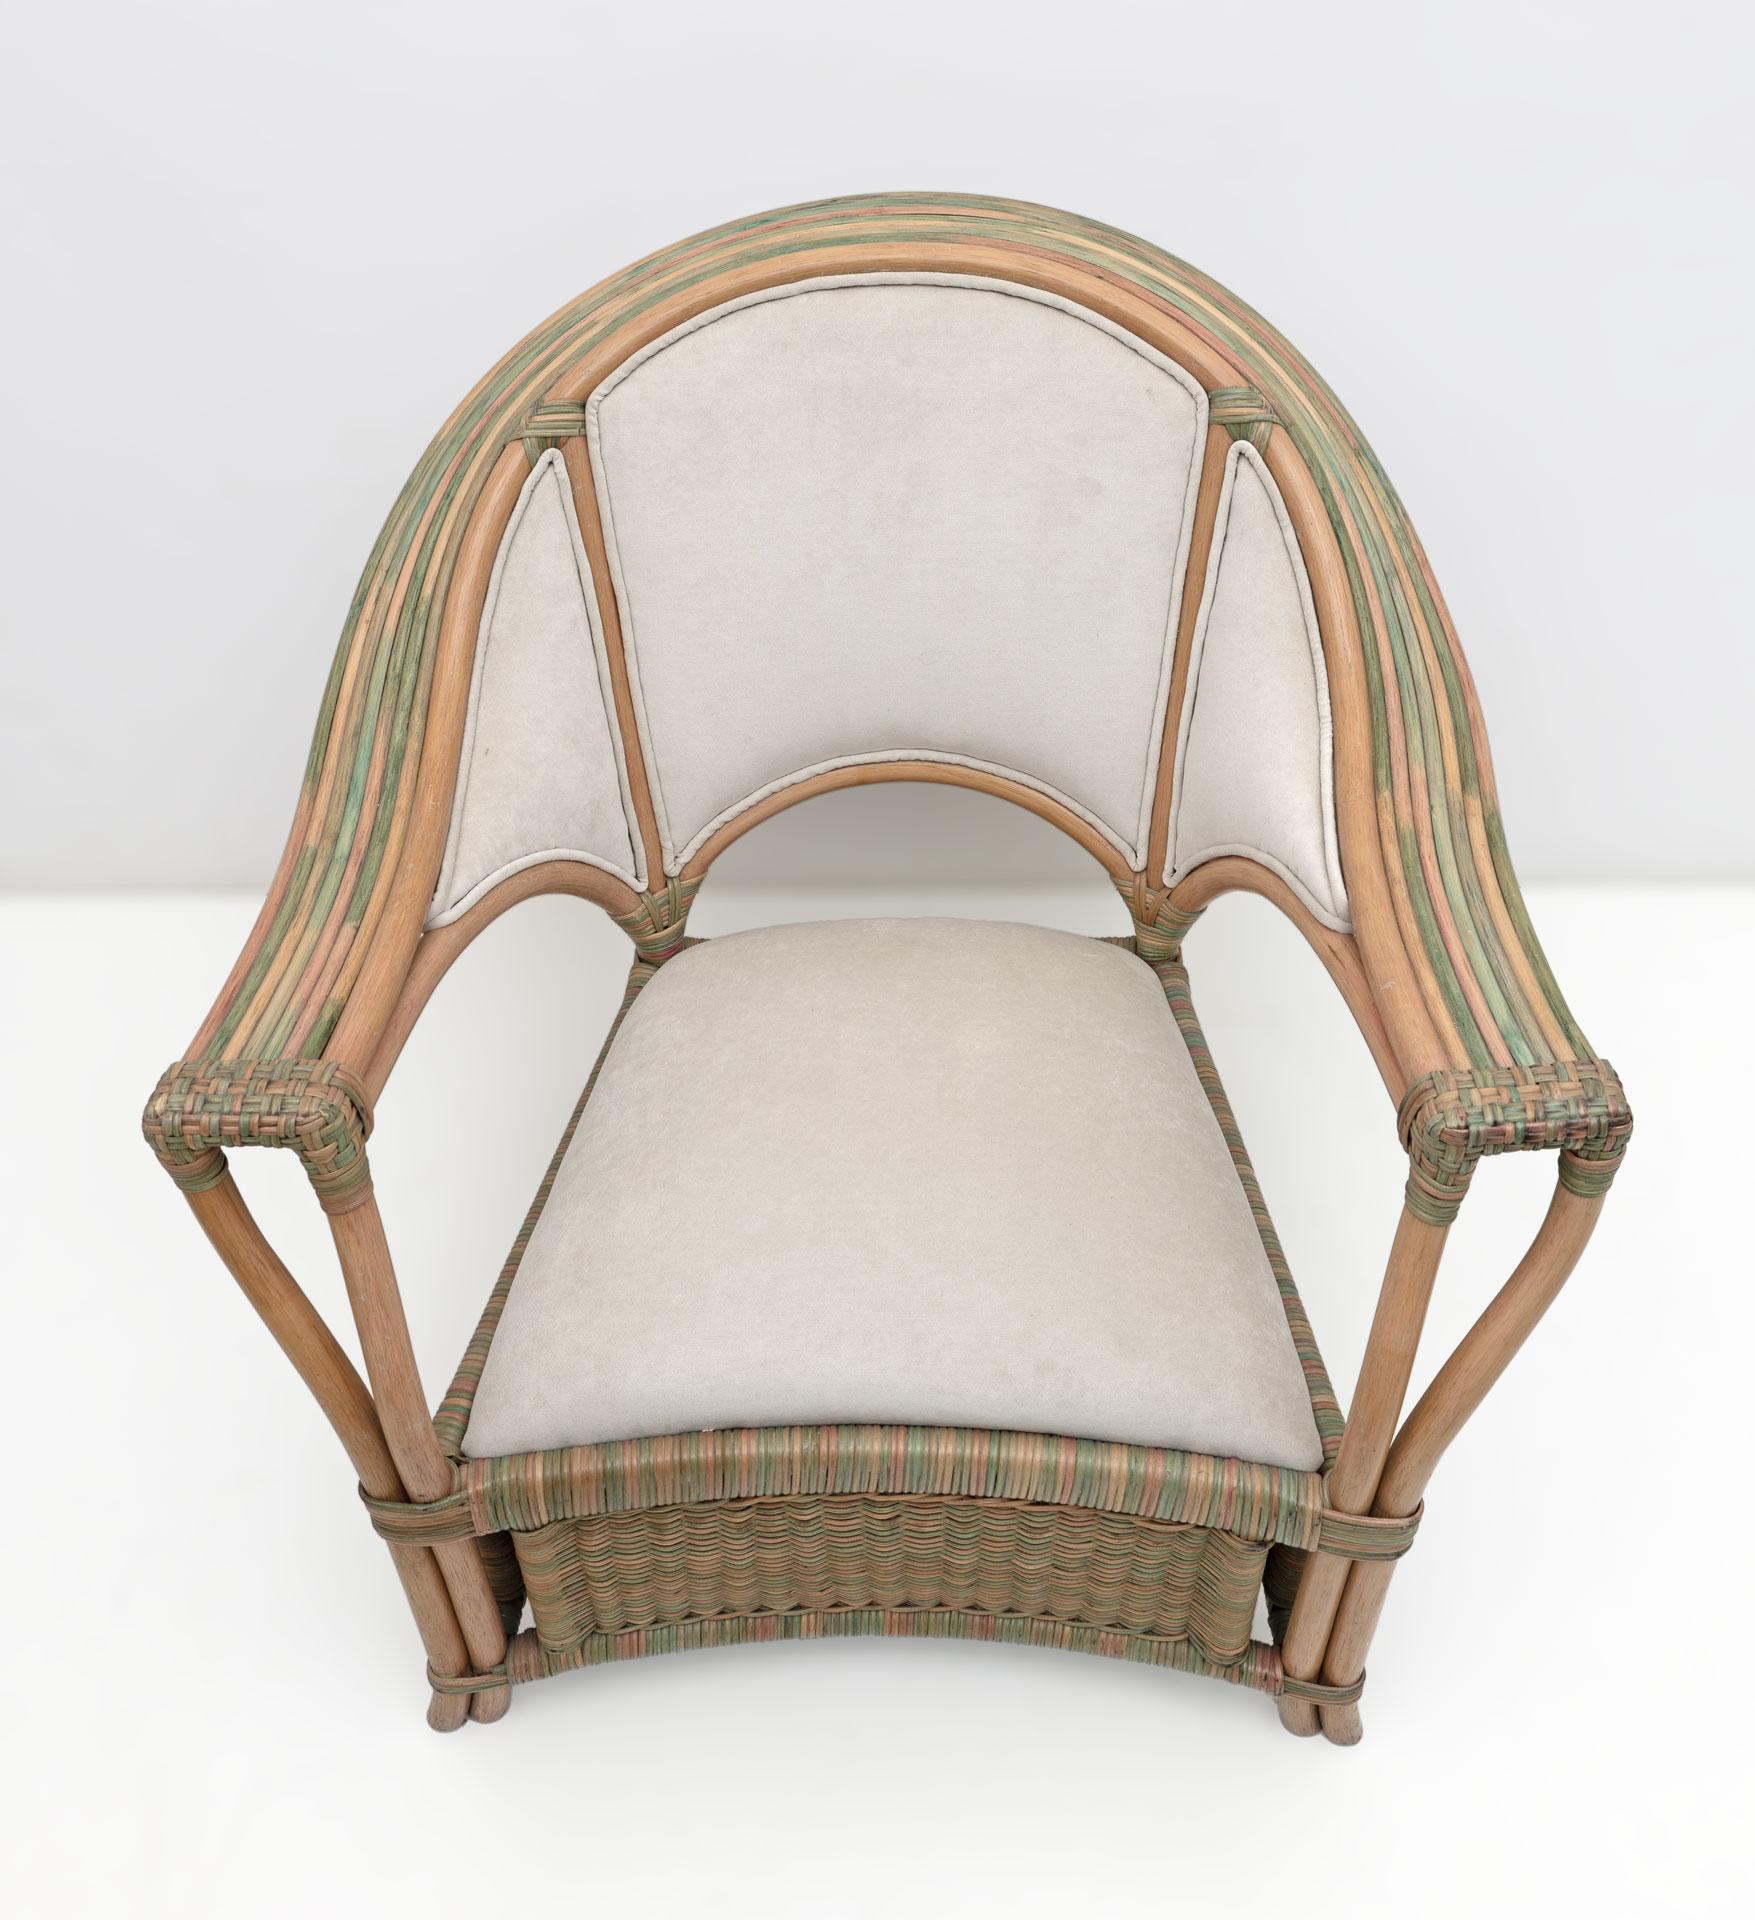 Pair of Mid-century Modern Italian Rattan and Wicker Armchairs, 1970s For Sale 3